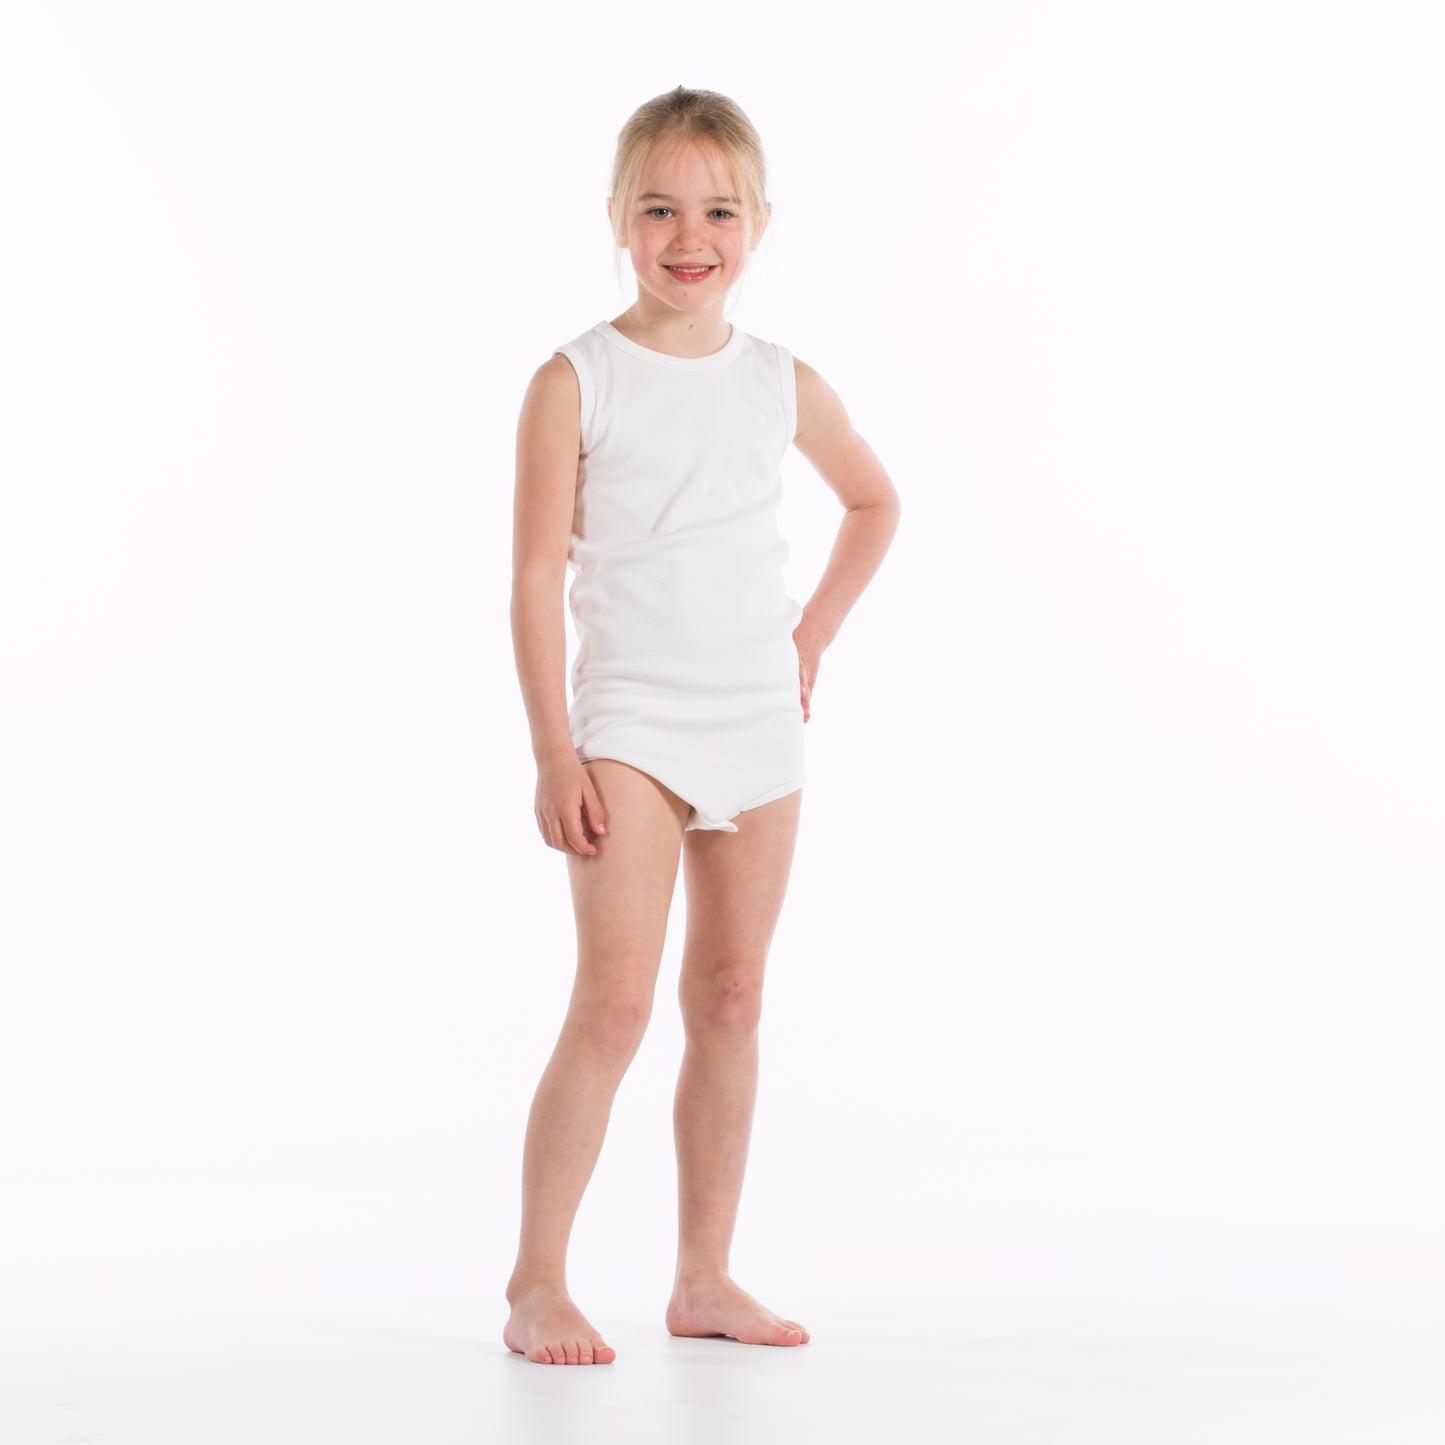 Children's Bodysuit with Popper Closure in the Crotch (4021)